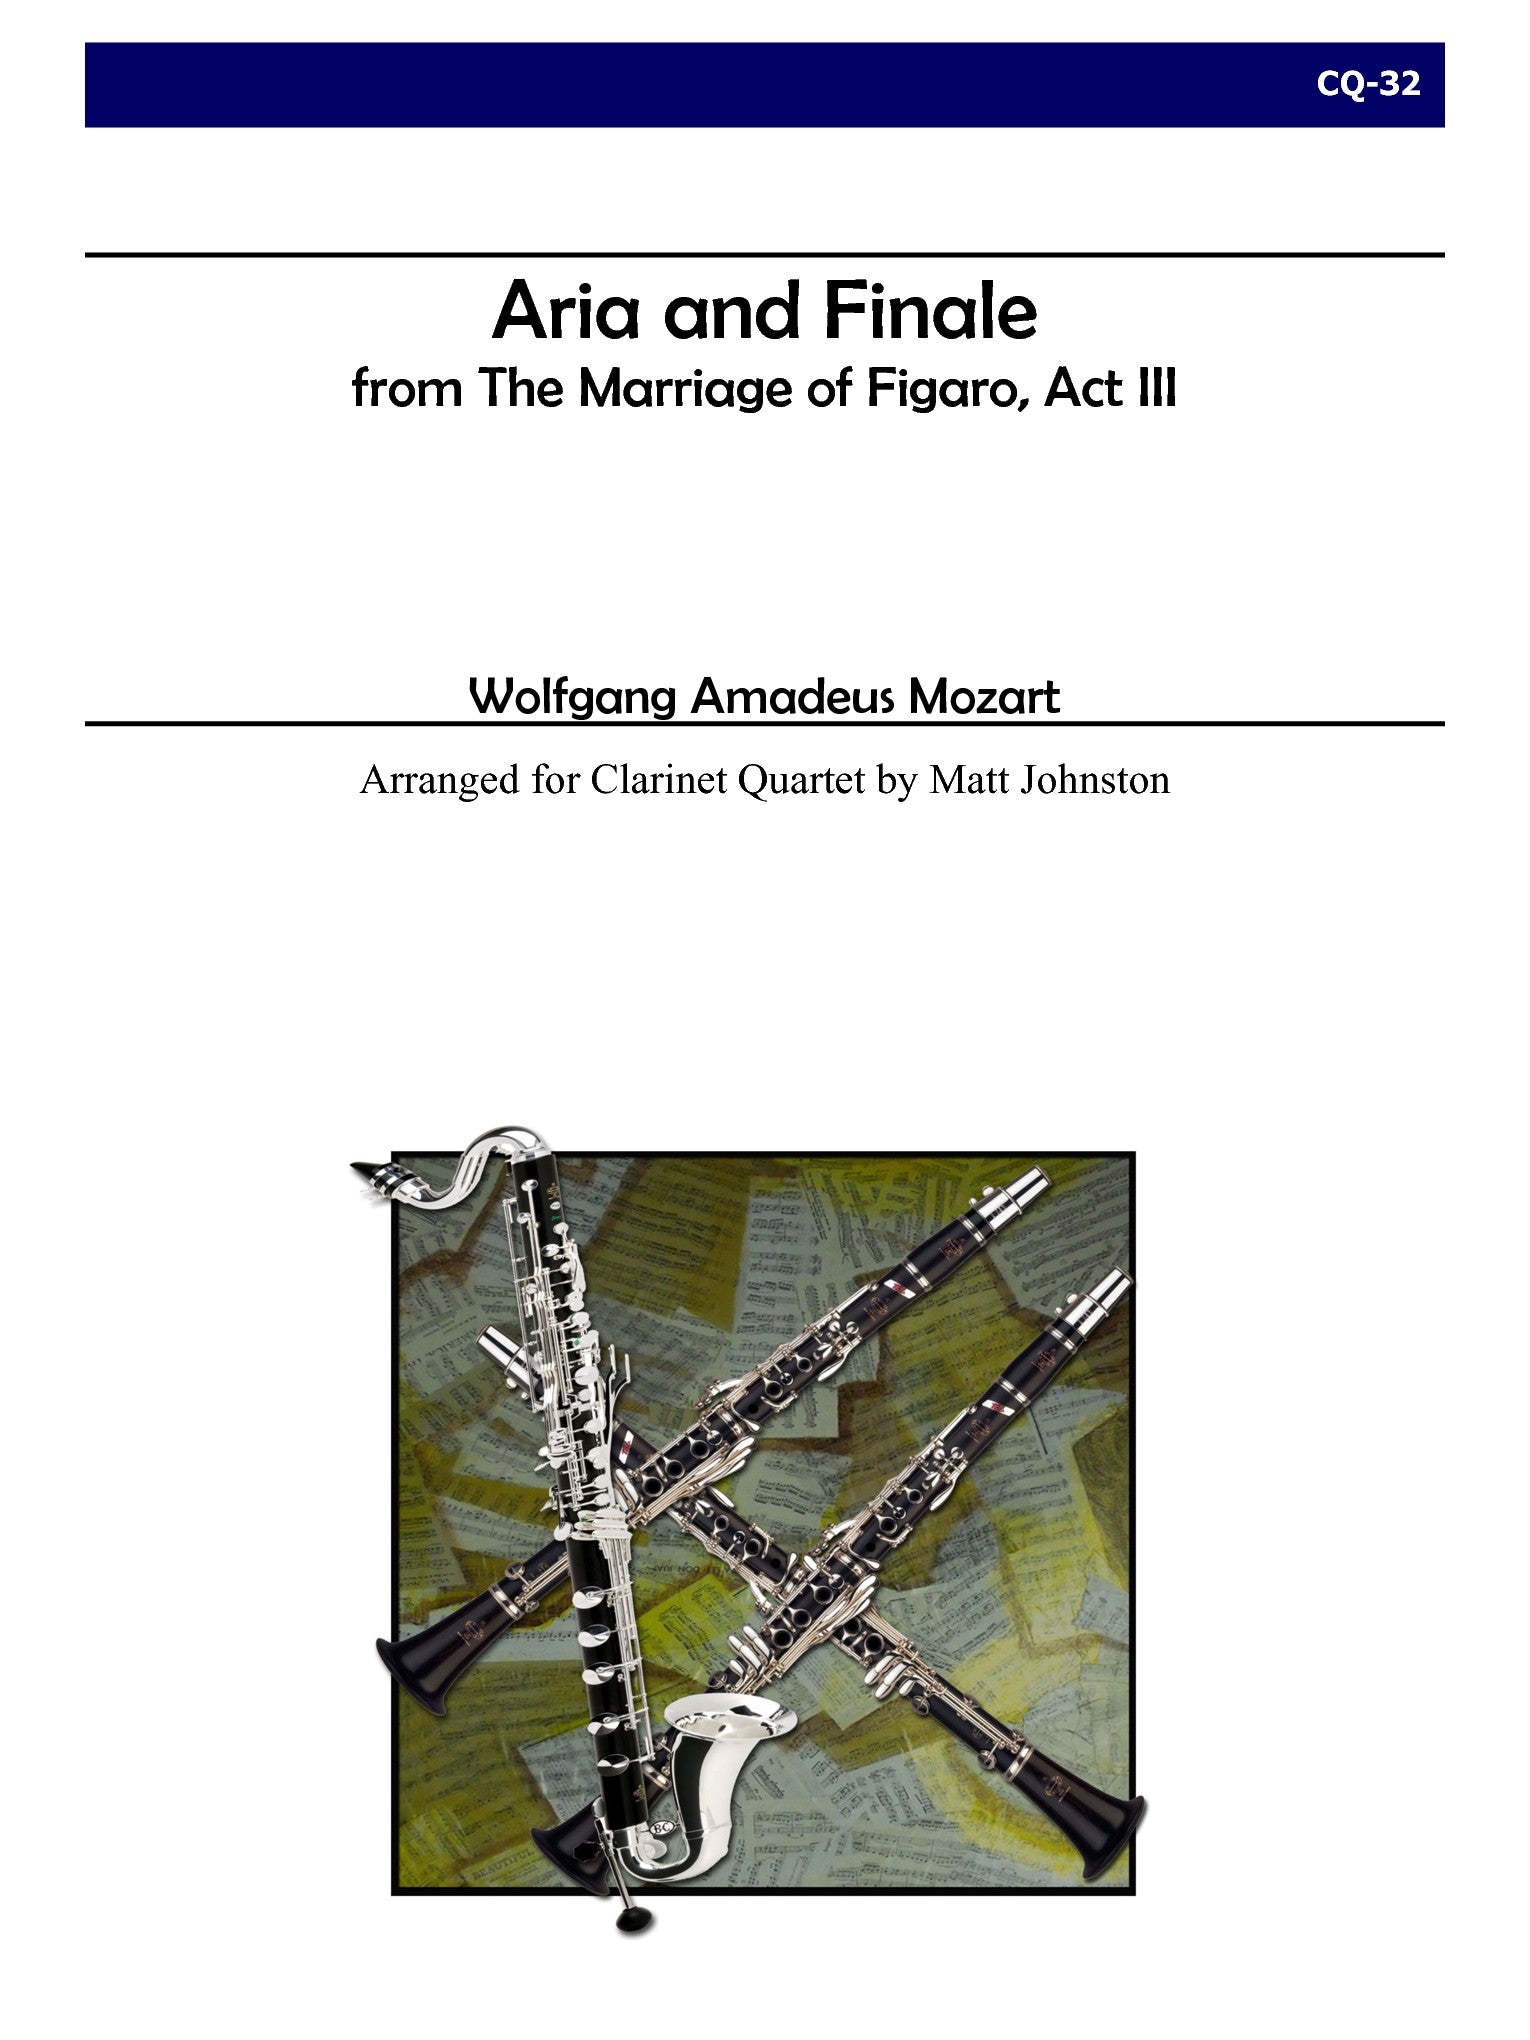 Mozart (arr. Matt Johnston) - Aria and Finale from The Marriage of Figaro, Act III for Clarinet Quartet